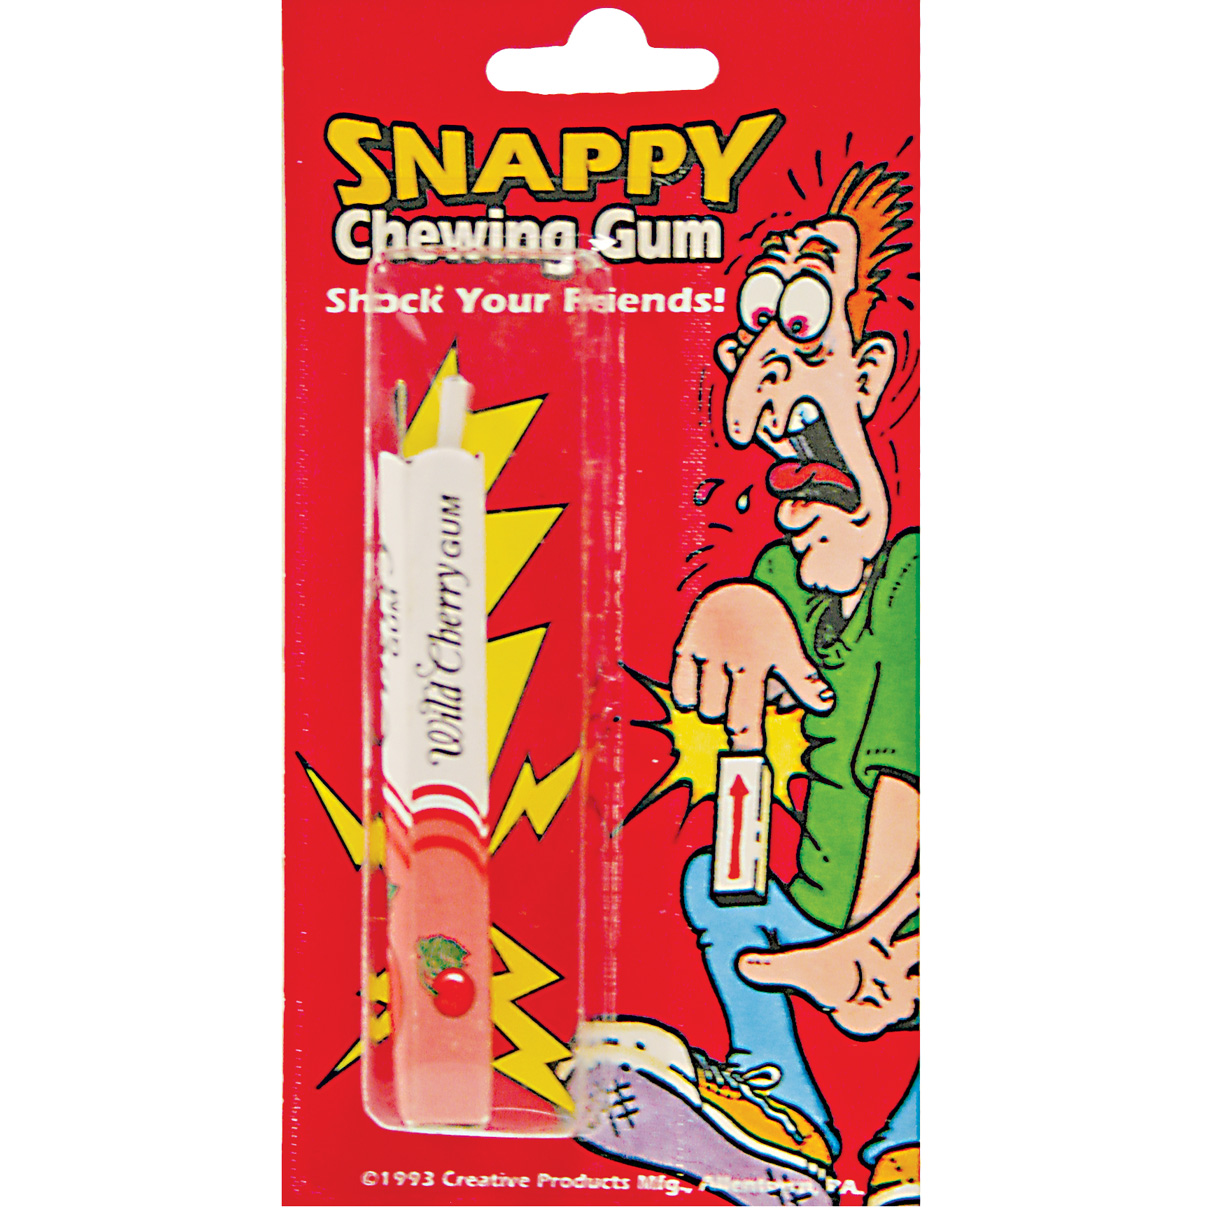 SNAPPING GUM